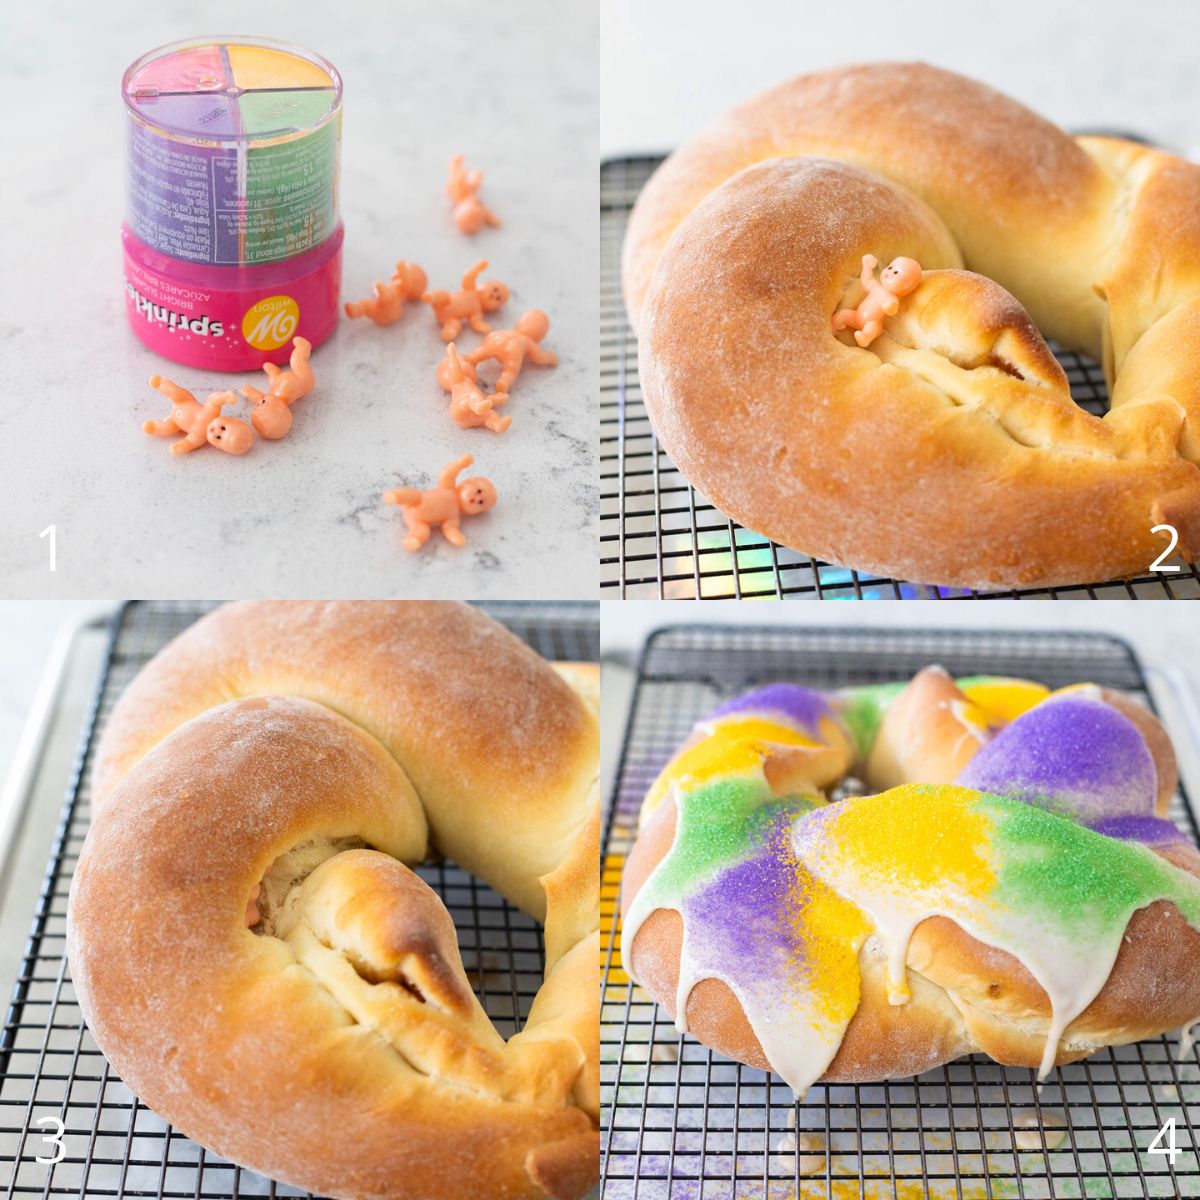 The step by step photos show how to hide the plastic baby inside the king cake and decorate it with icing and sprinkles.